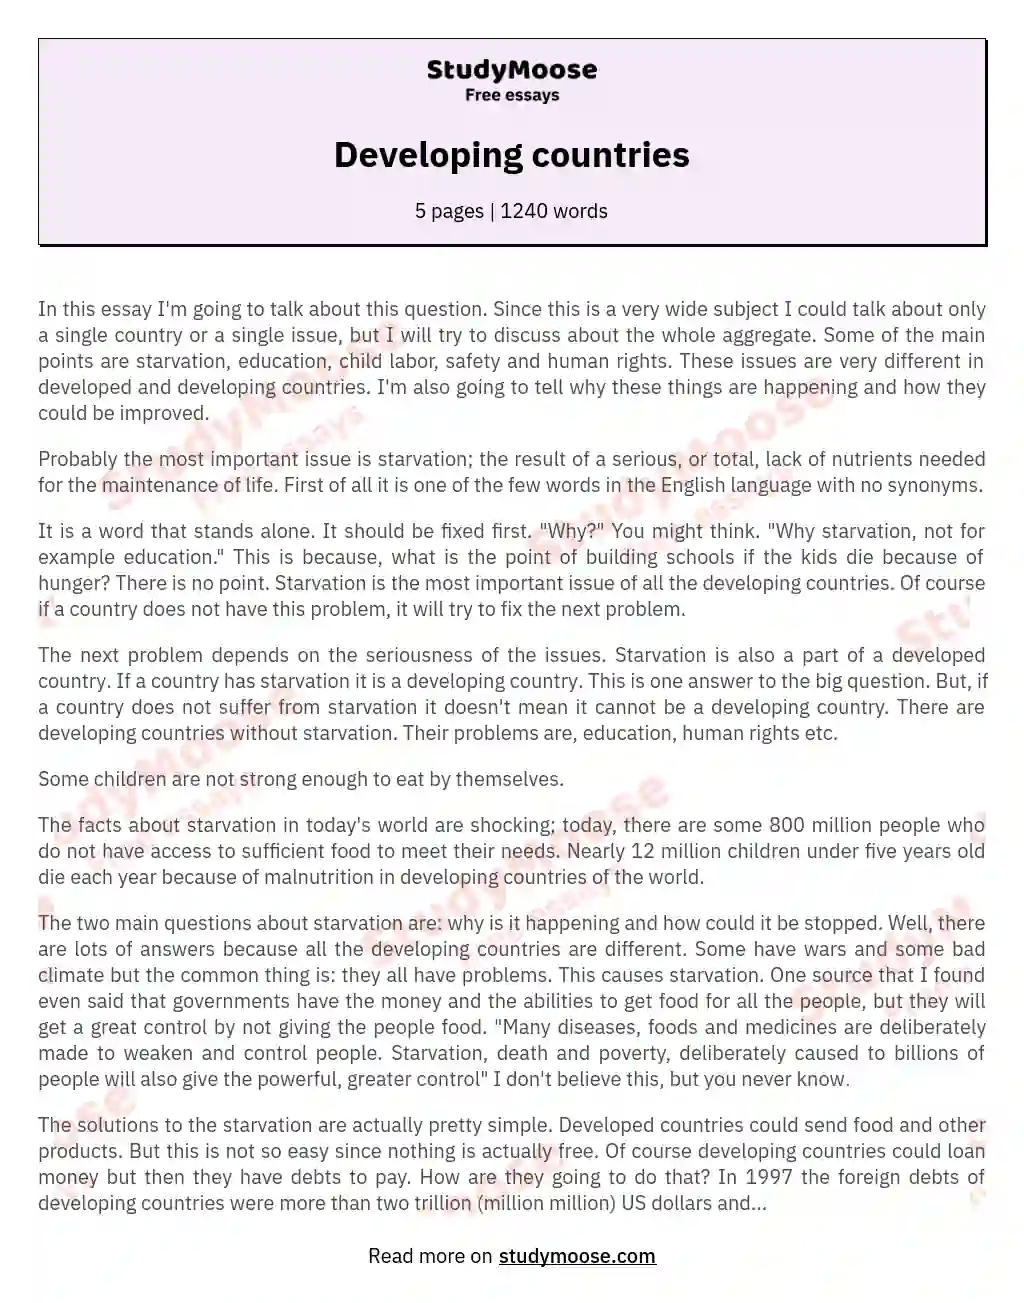 Developing countries essay